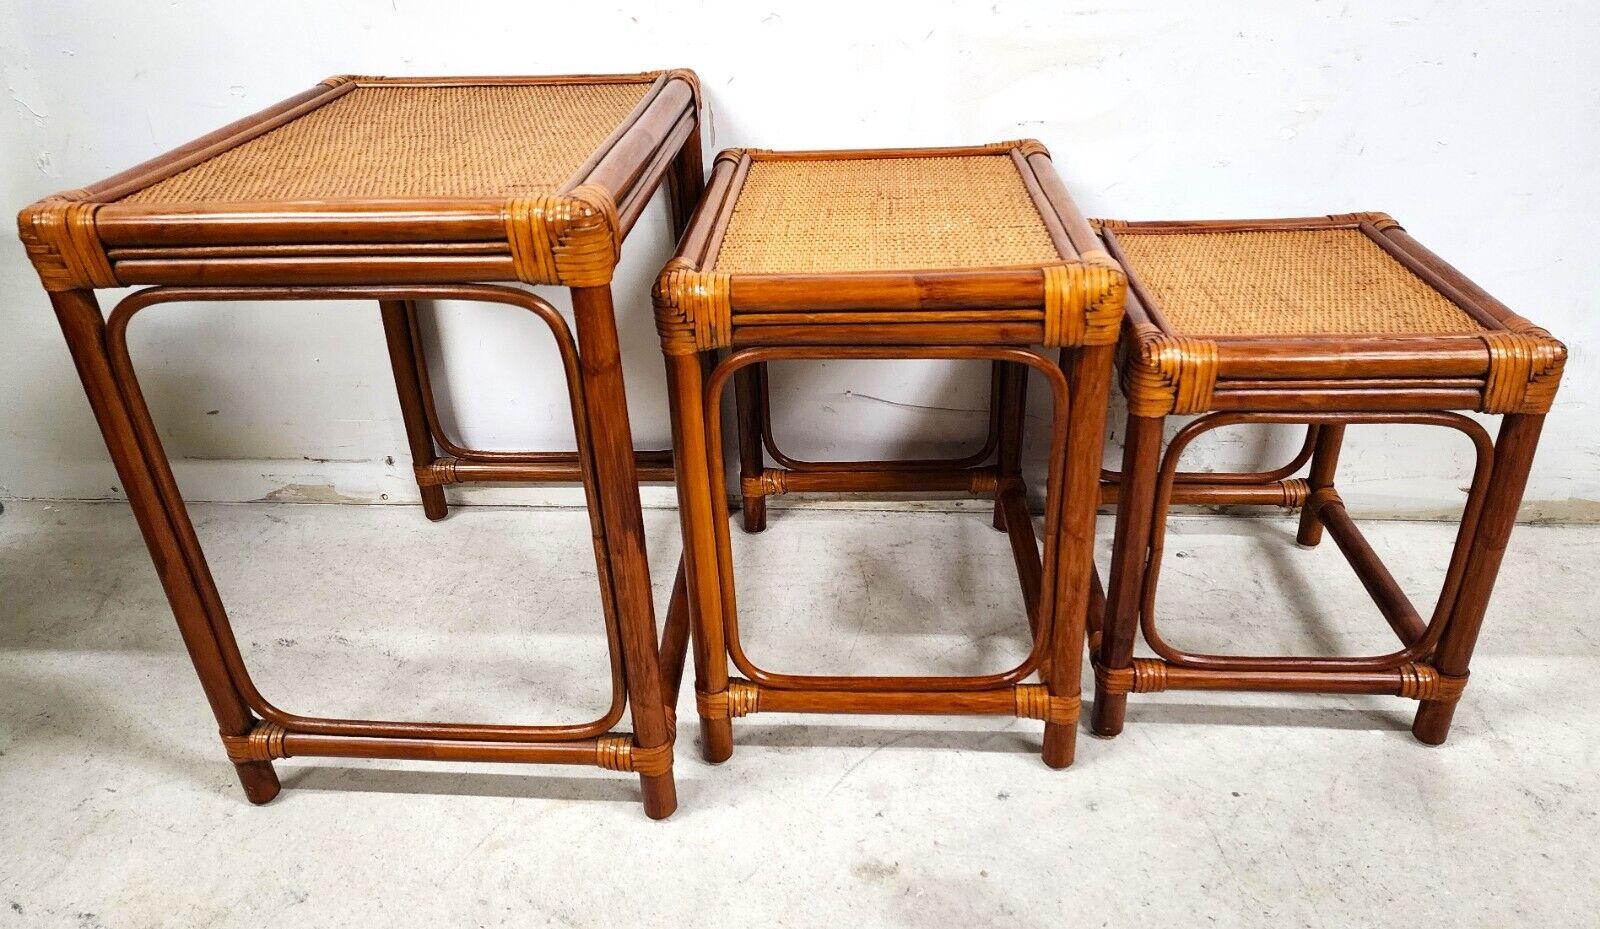 Bamboo Nesting Tables Rattan Wicker Set of 3 In Good Condition For Sale In Lake Worth, FL